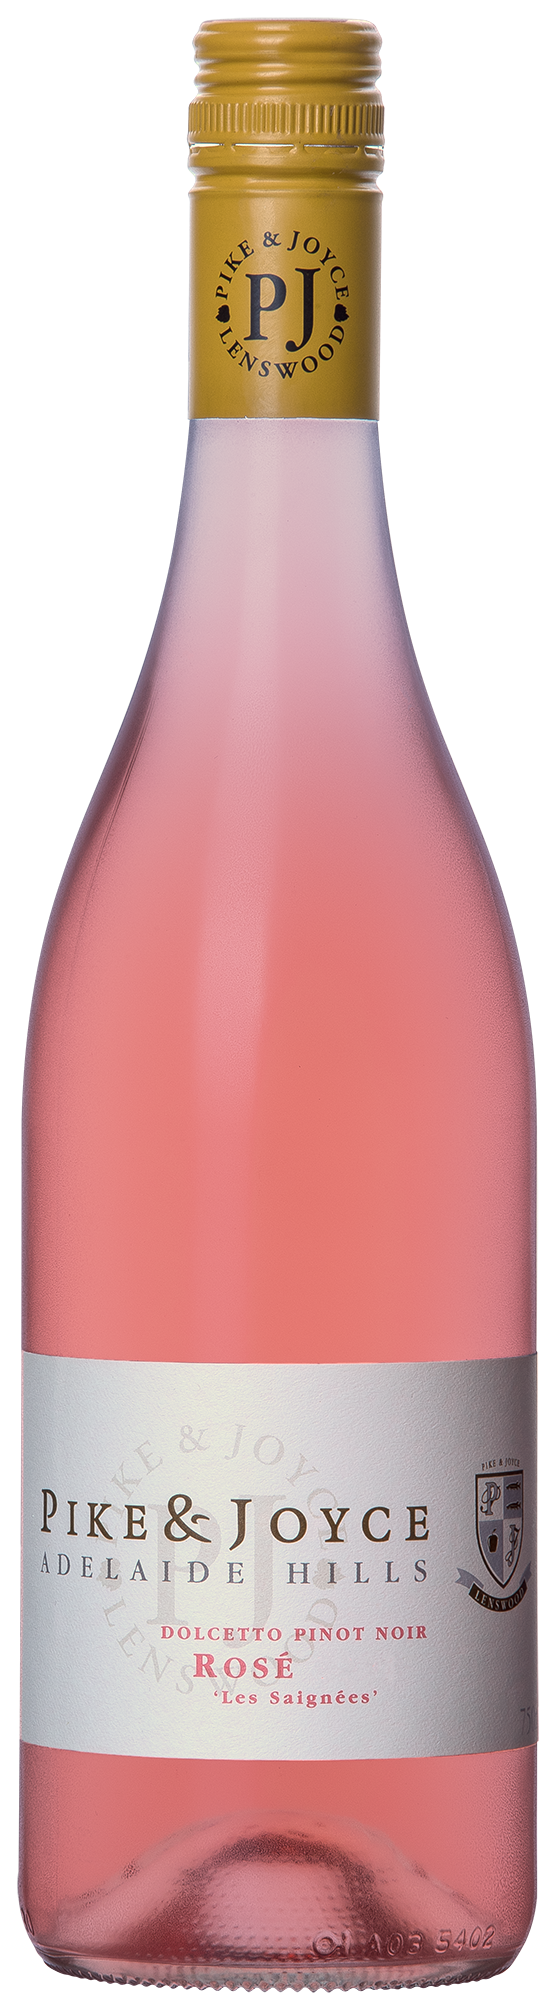 Pike & Joyce NV 'Les Saignees' Dolcetto Pinot Noir Rose